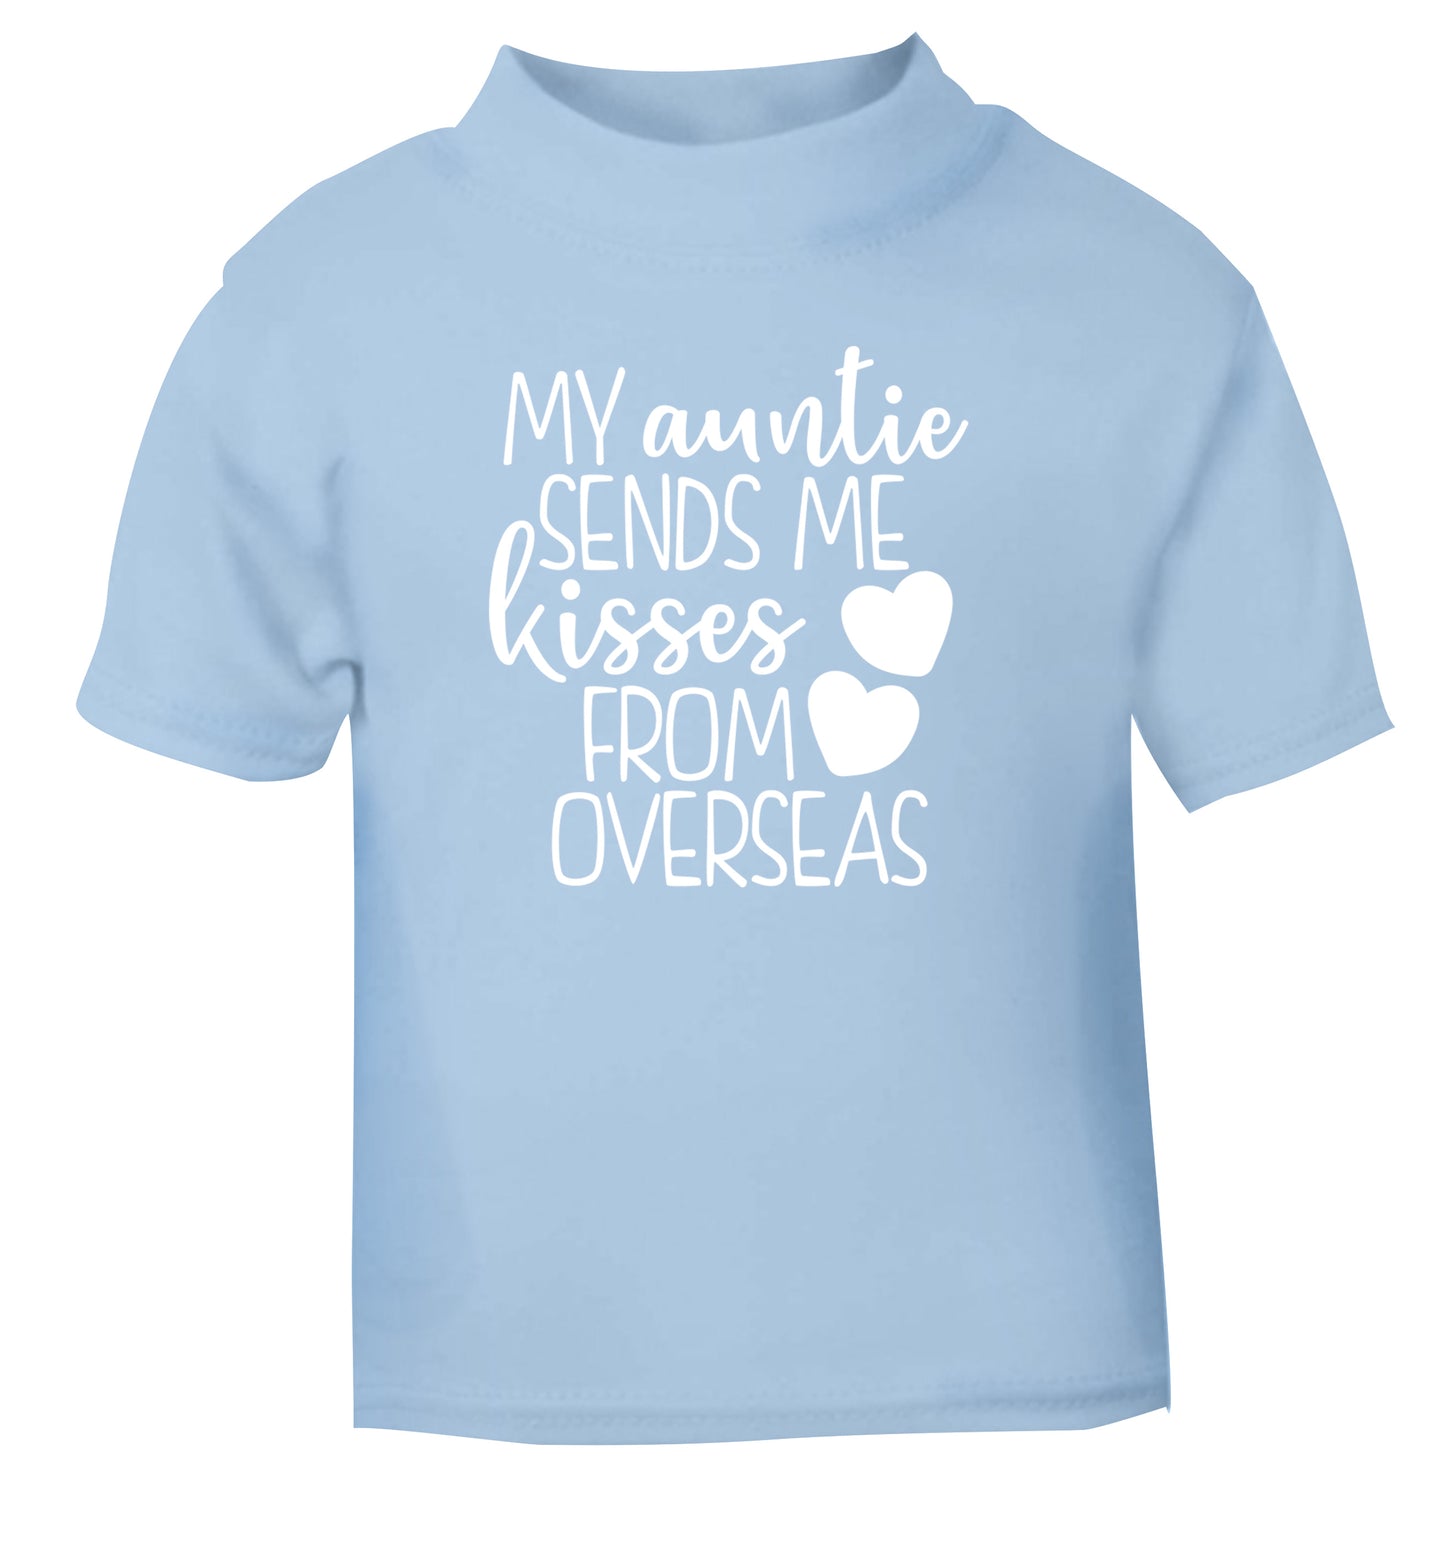 My auntie sends me kisses from overseas light blue Baby Toddler Tshirt 2 Years